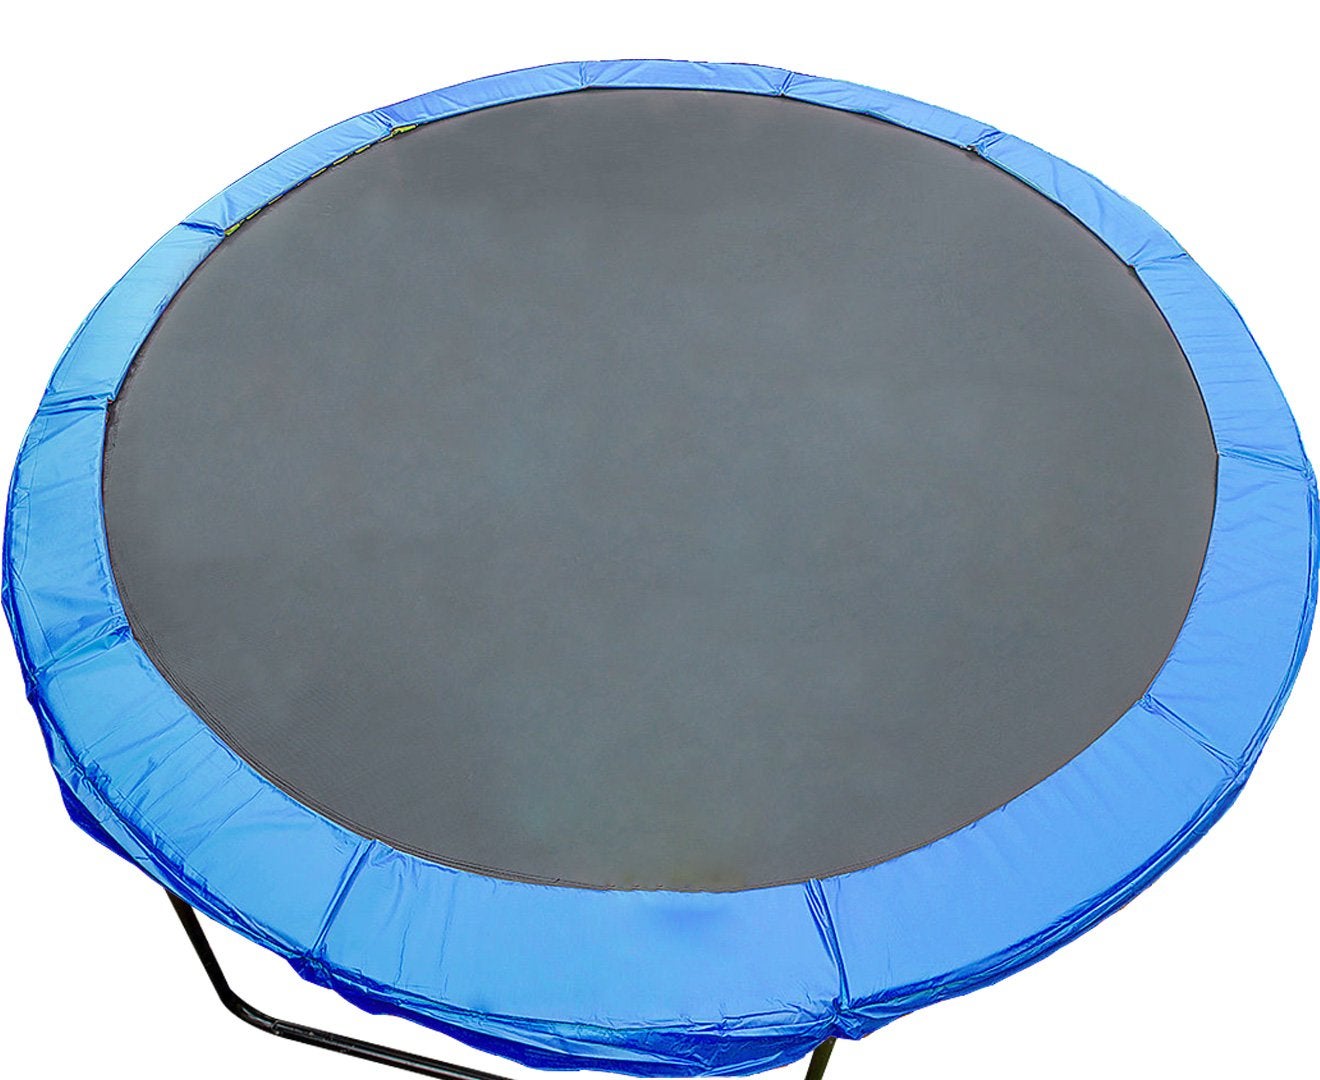 Replacement Trampoline Pad Reinforced Outdoor Round Spring Cover 12ft